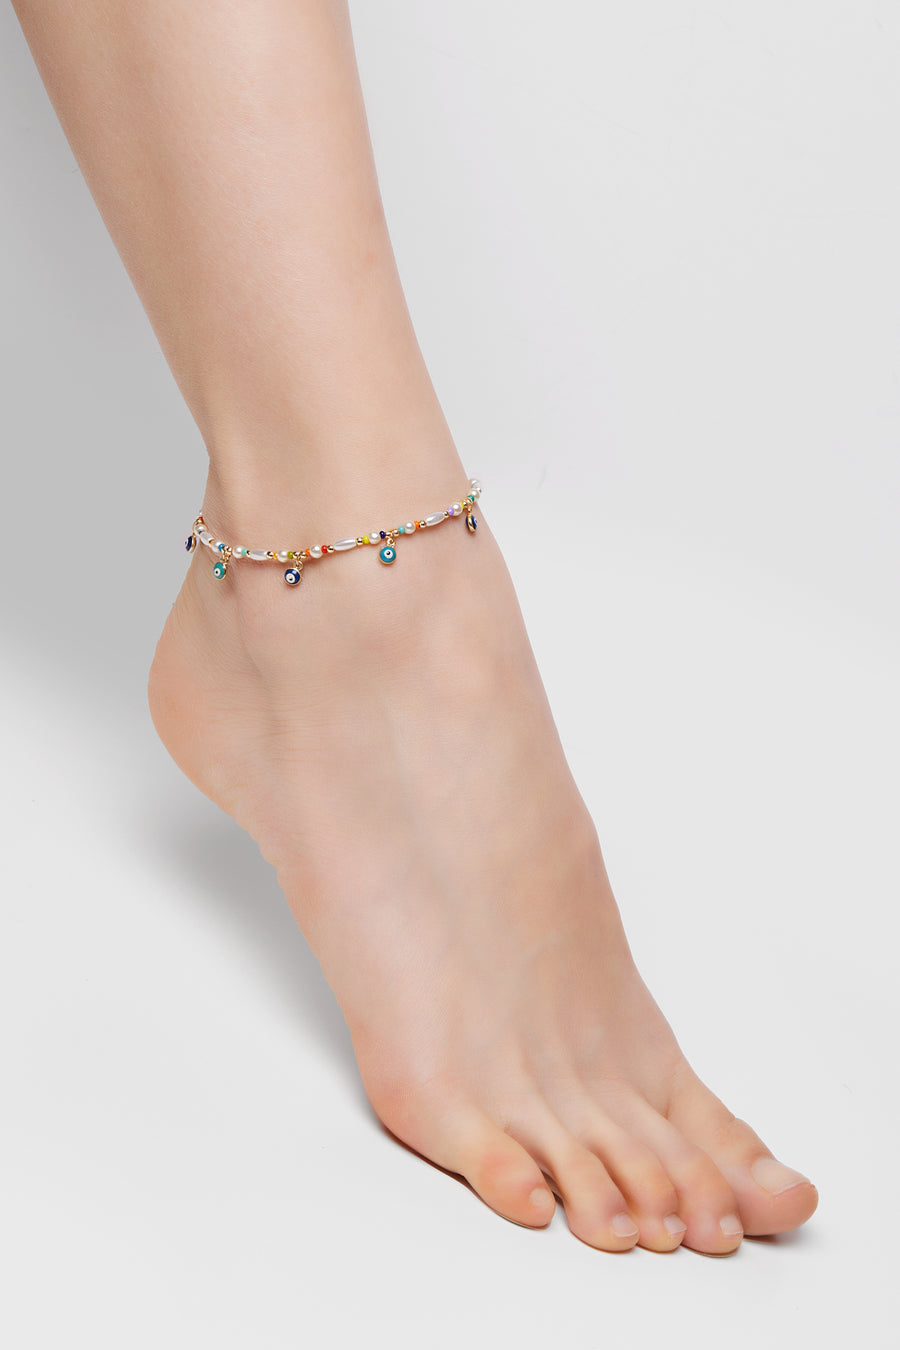 Lucky charm anklet